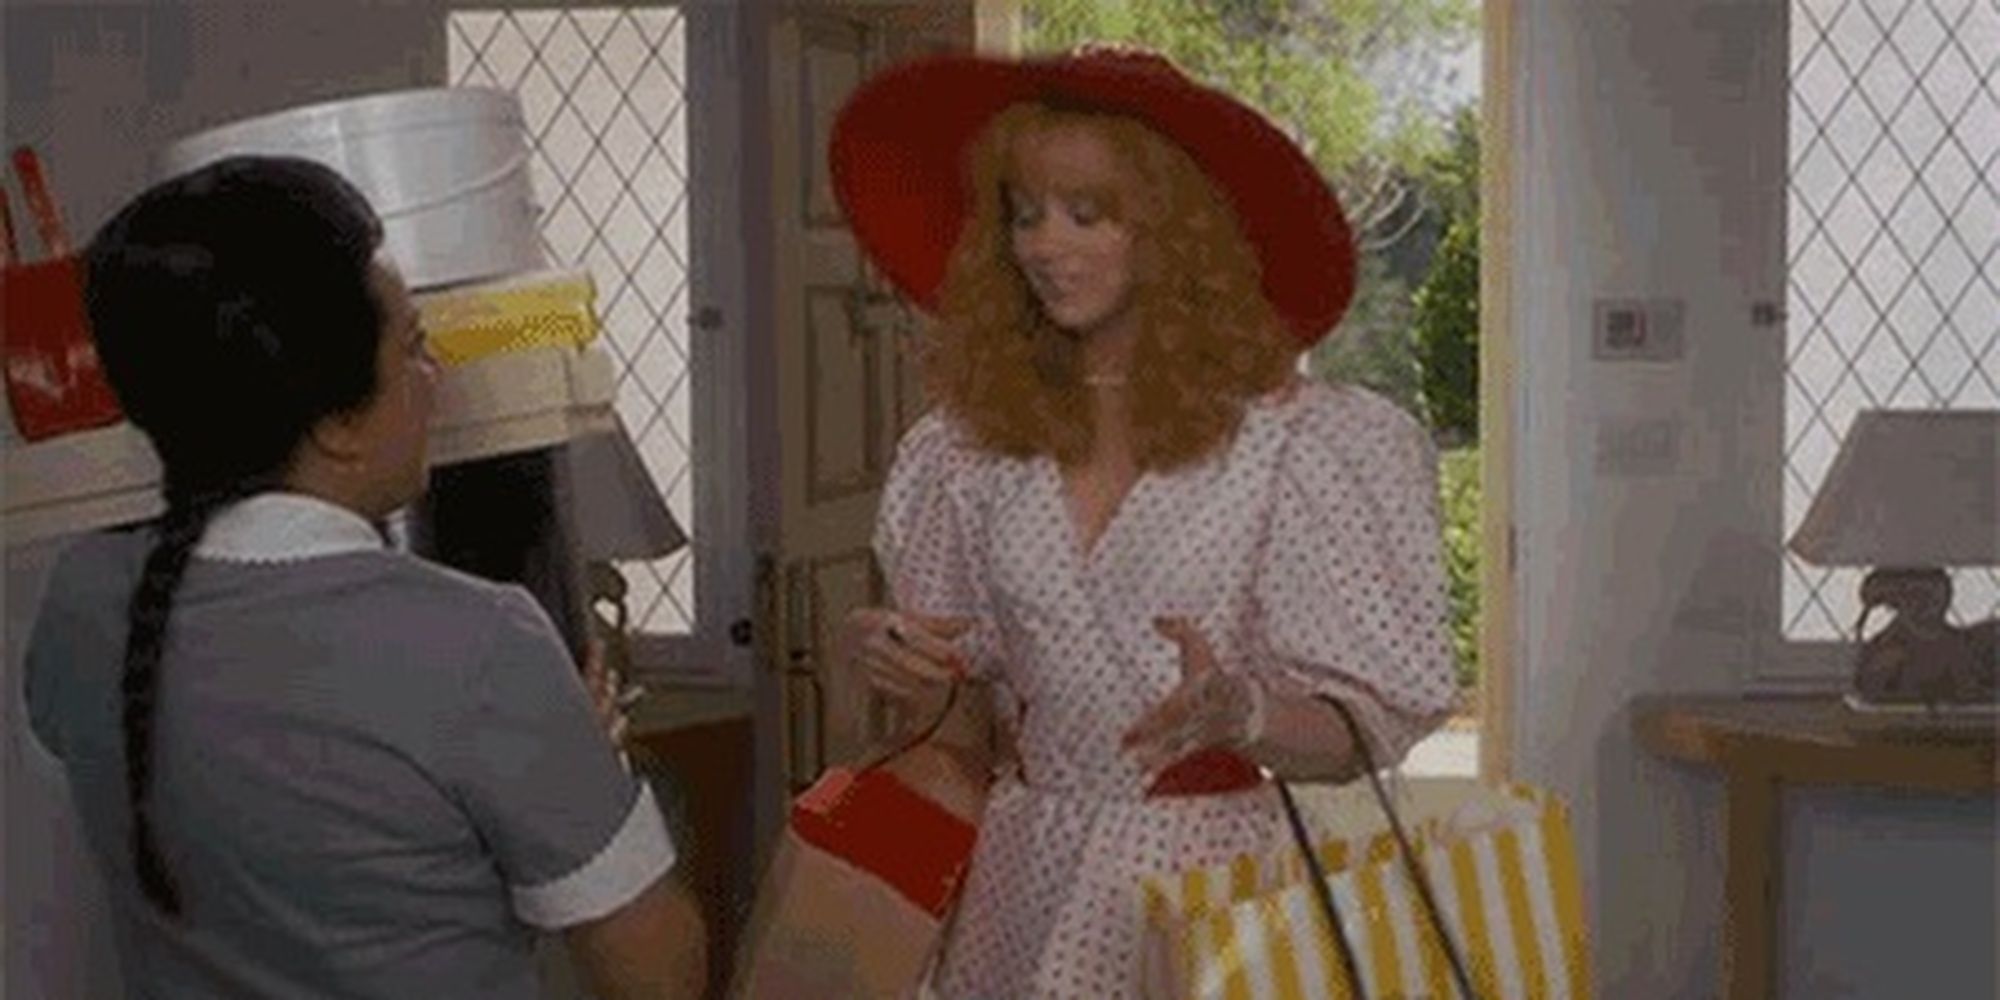 Troop Beverly Hills: 10 Of Phyllis Nefler's Most Hilarious Q